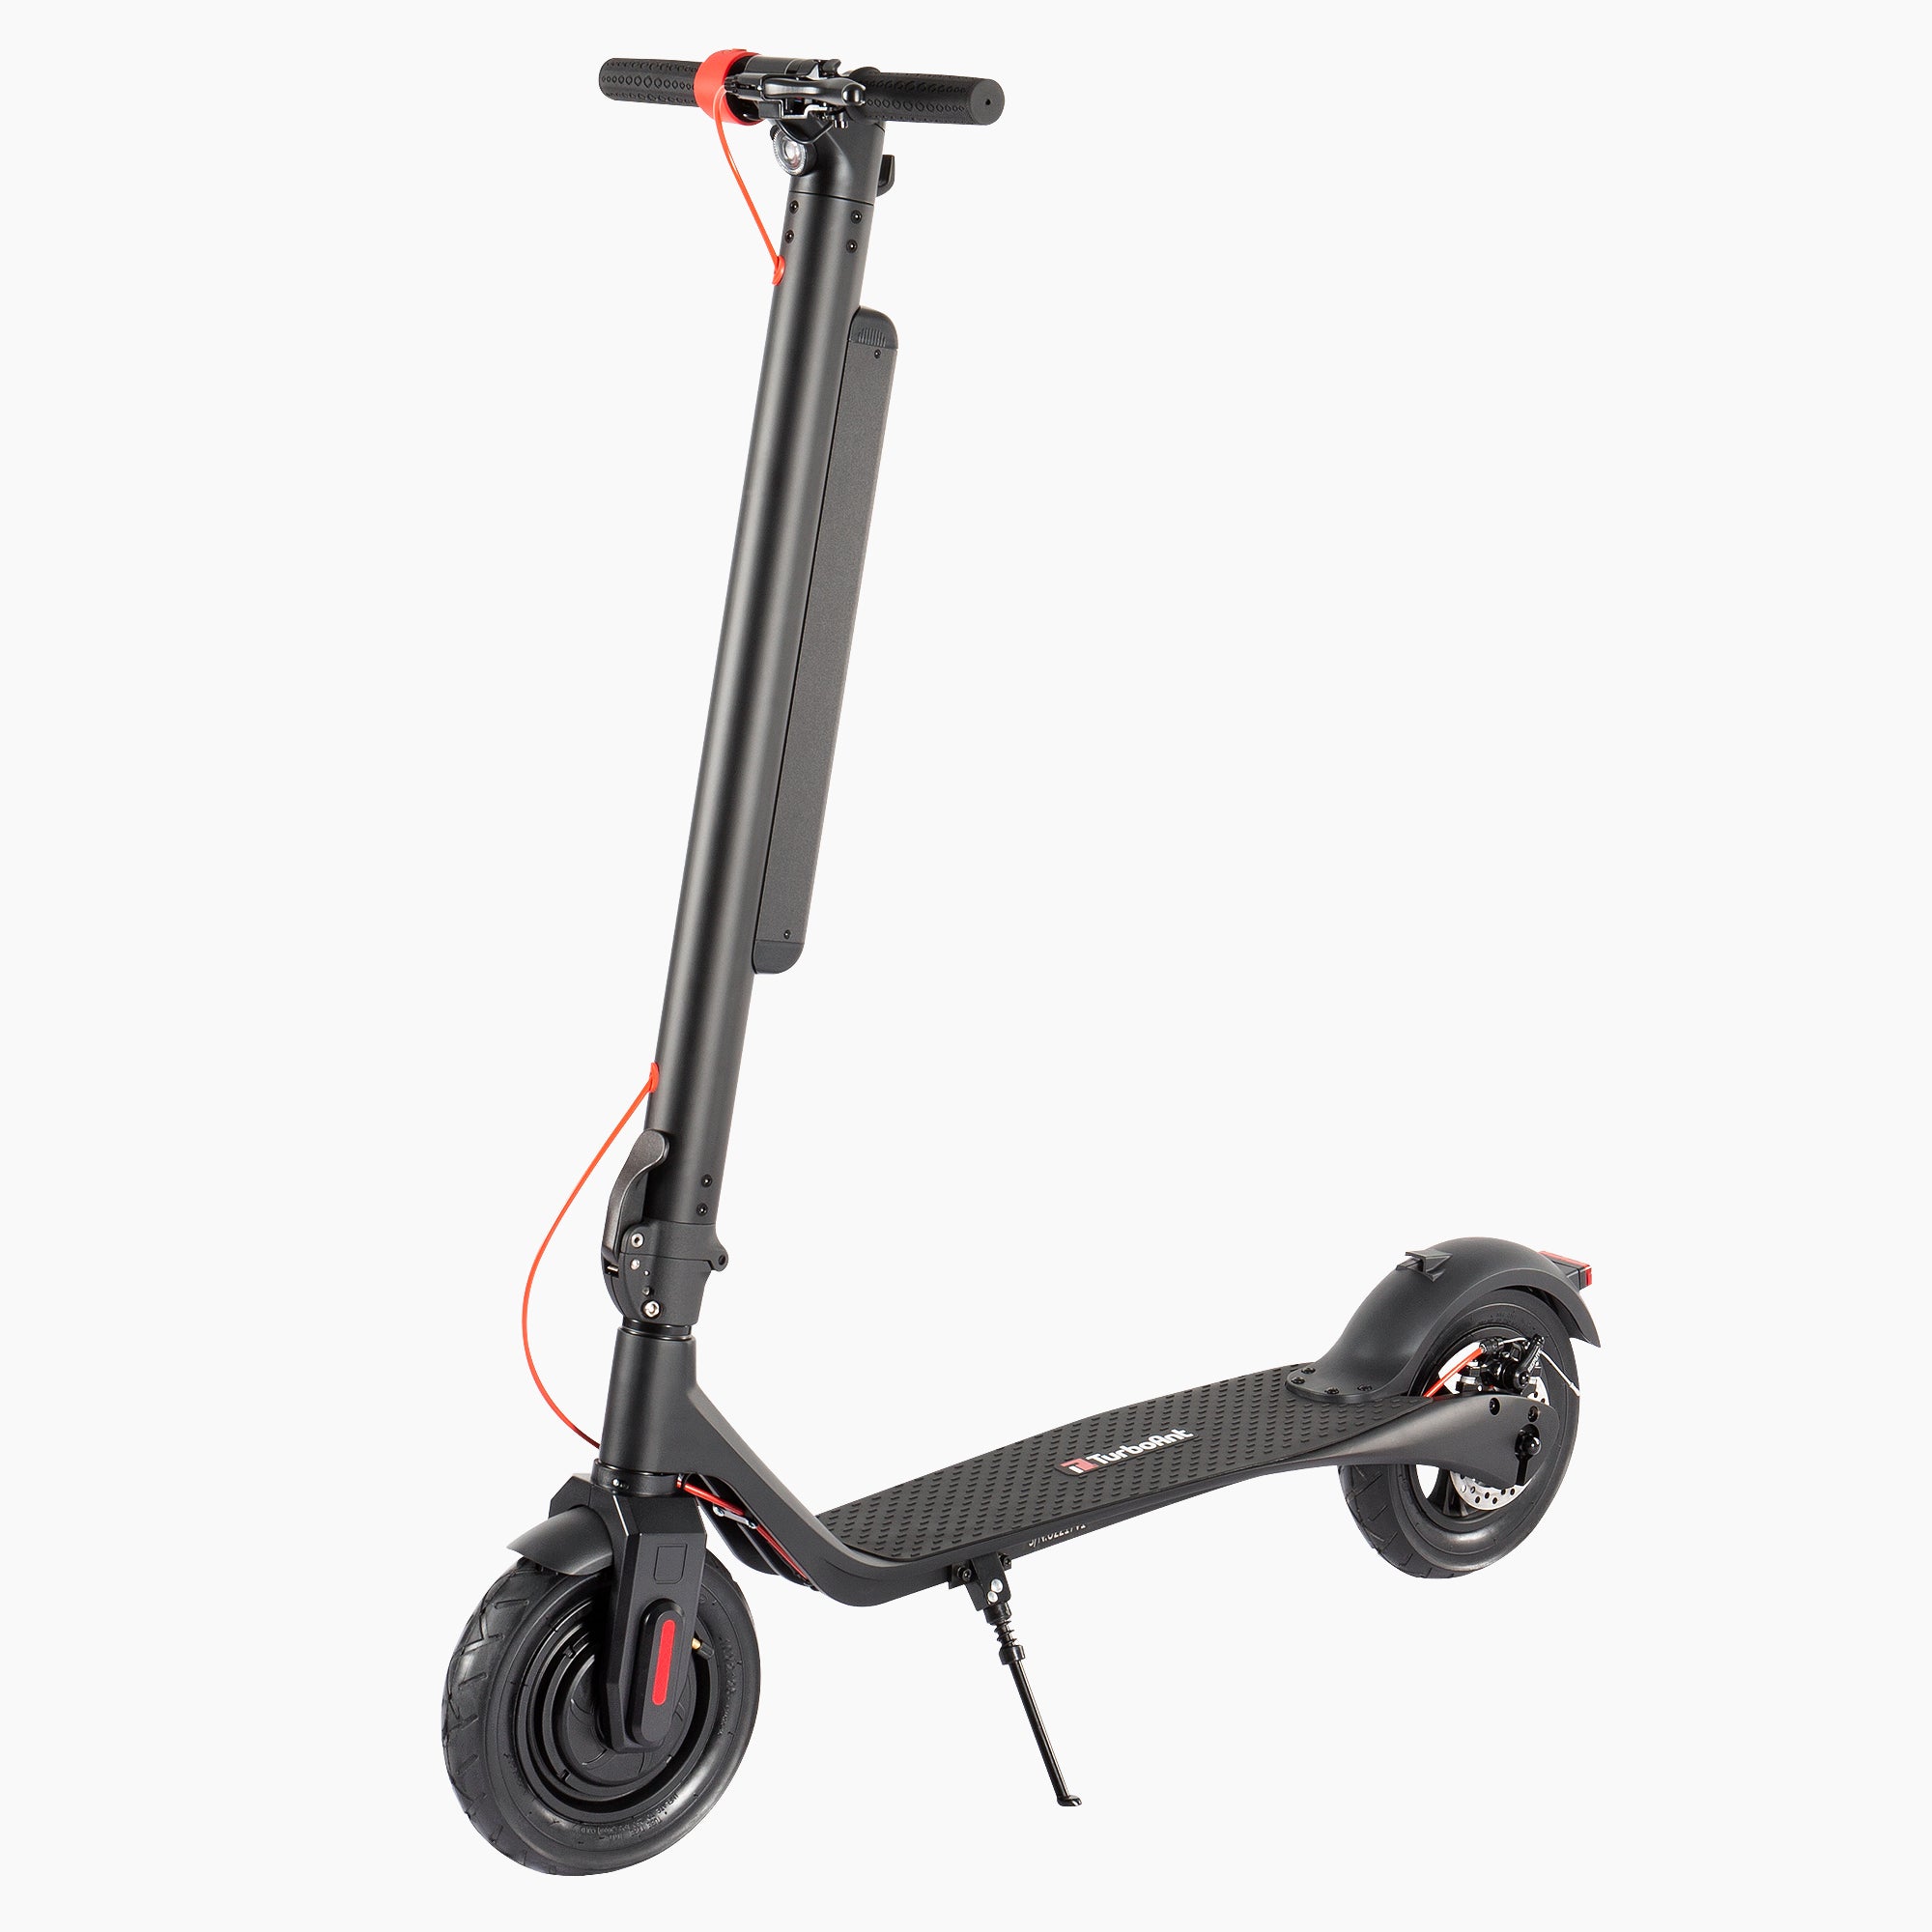 TurboAnt X7 Max Foldable electric scooter